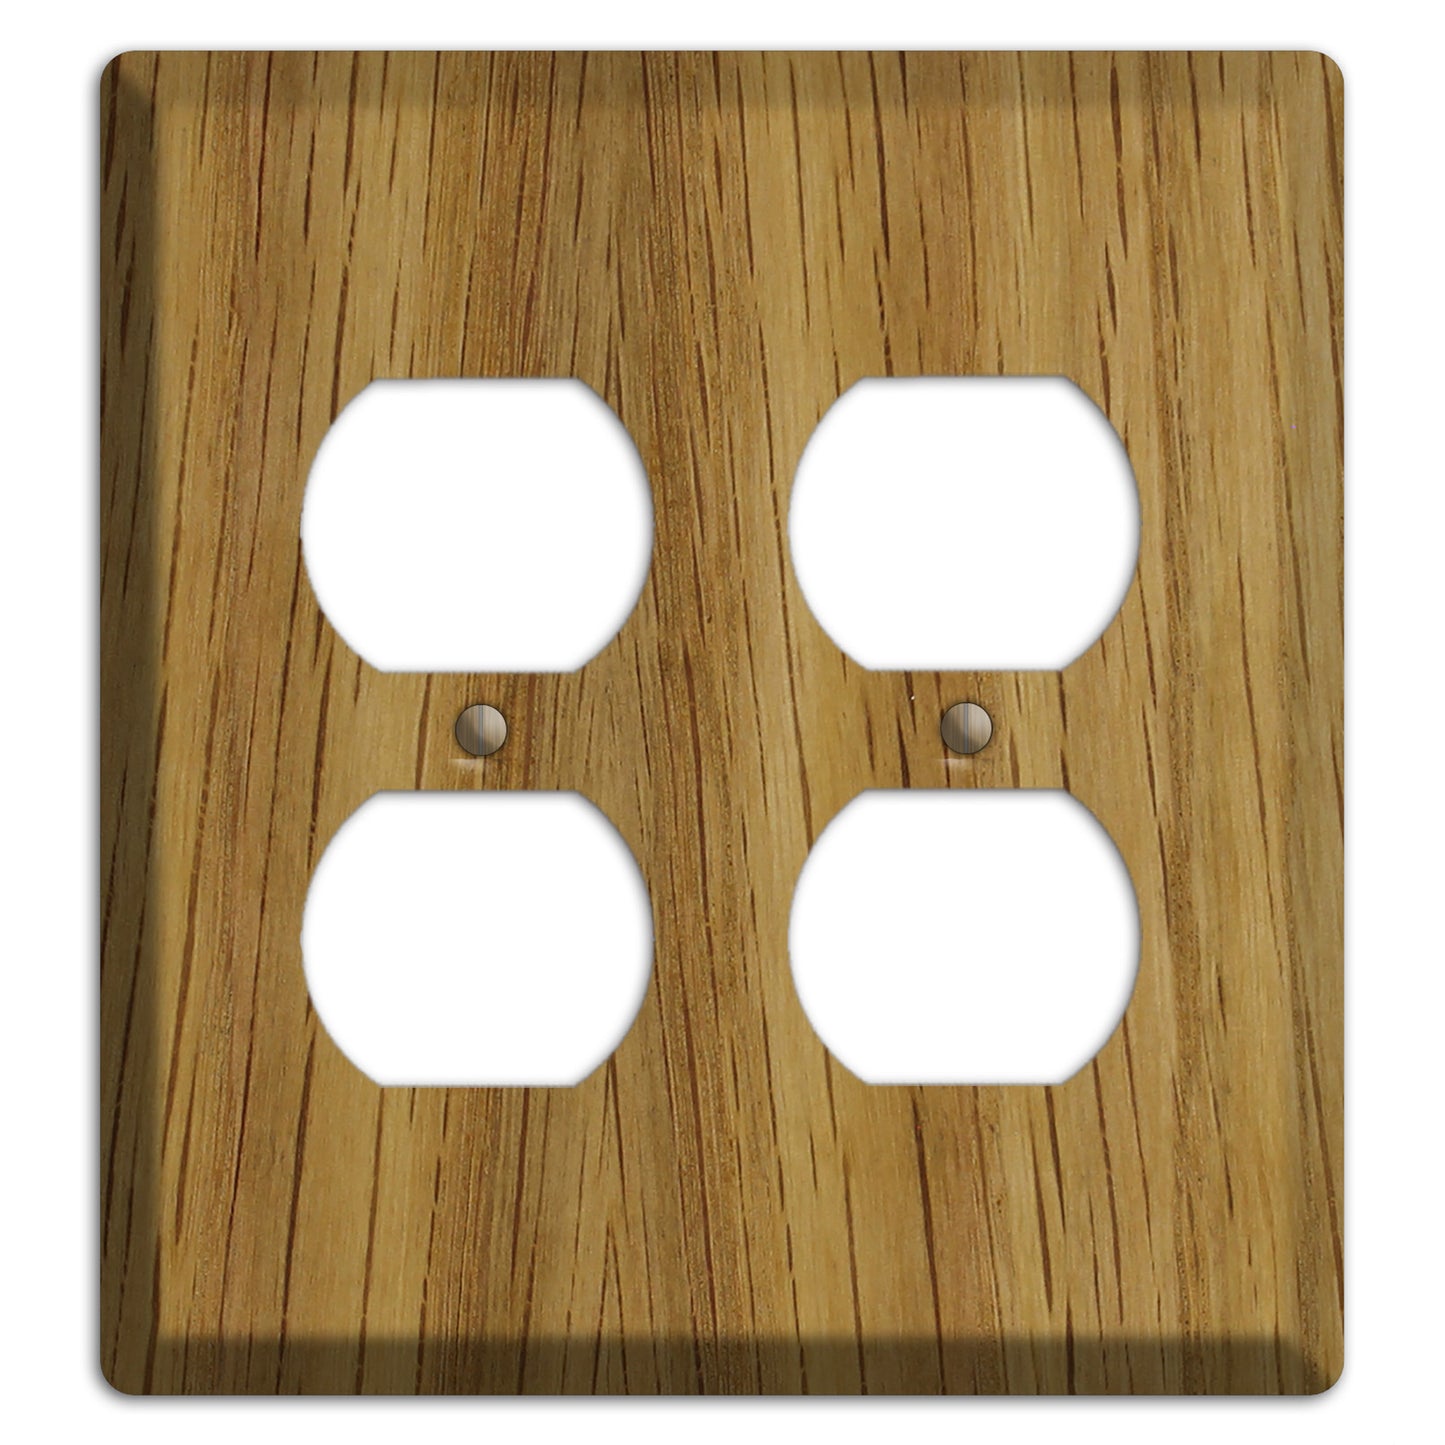 Unfinished White Oak Wood 2 Duplex Outlet Cover Plate